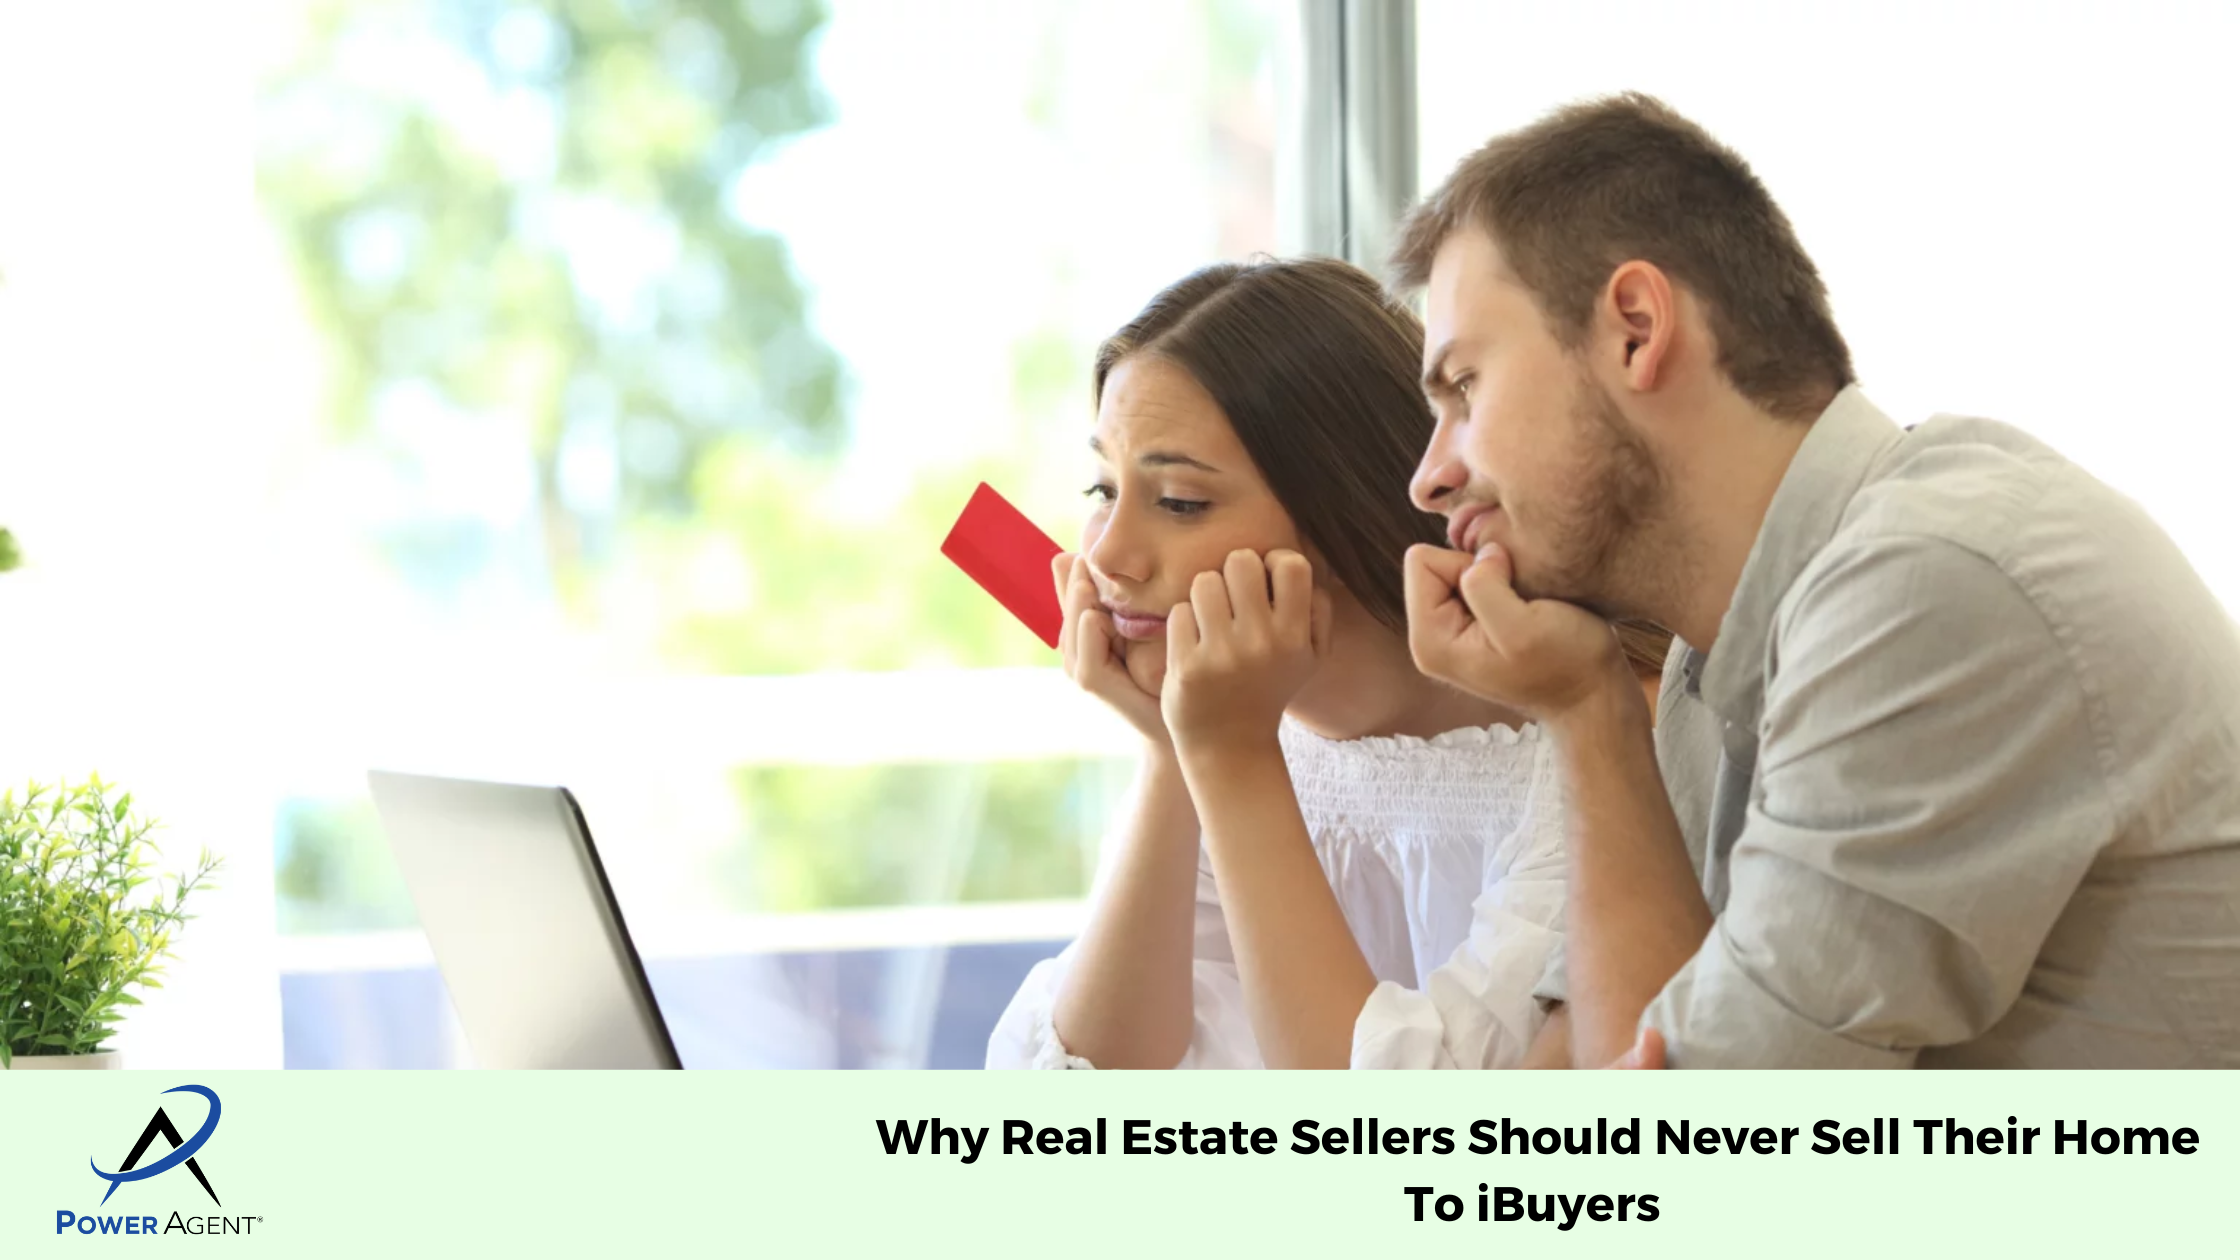 Why Real Estate Sellers Should Never Sell Their Home To iBuyers